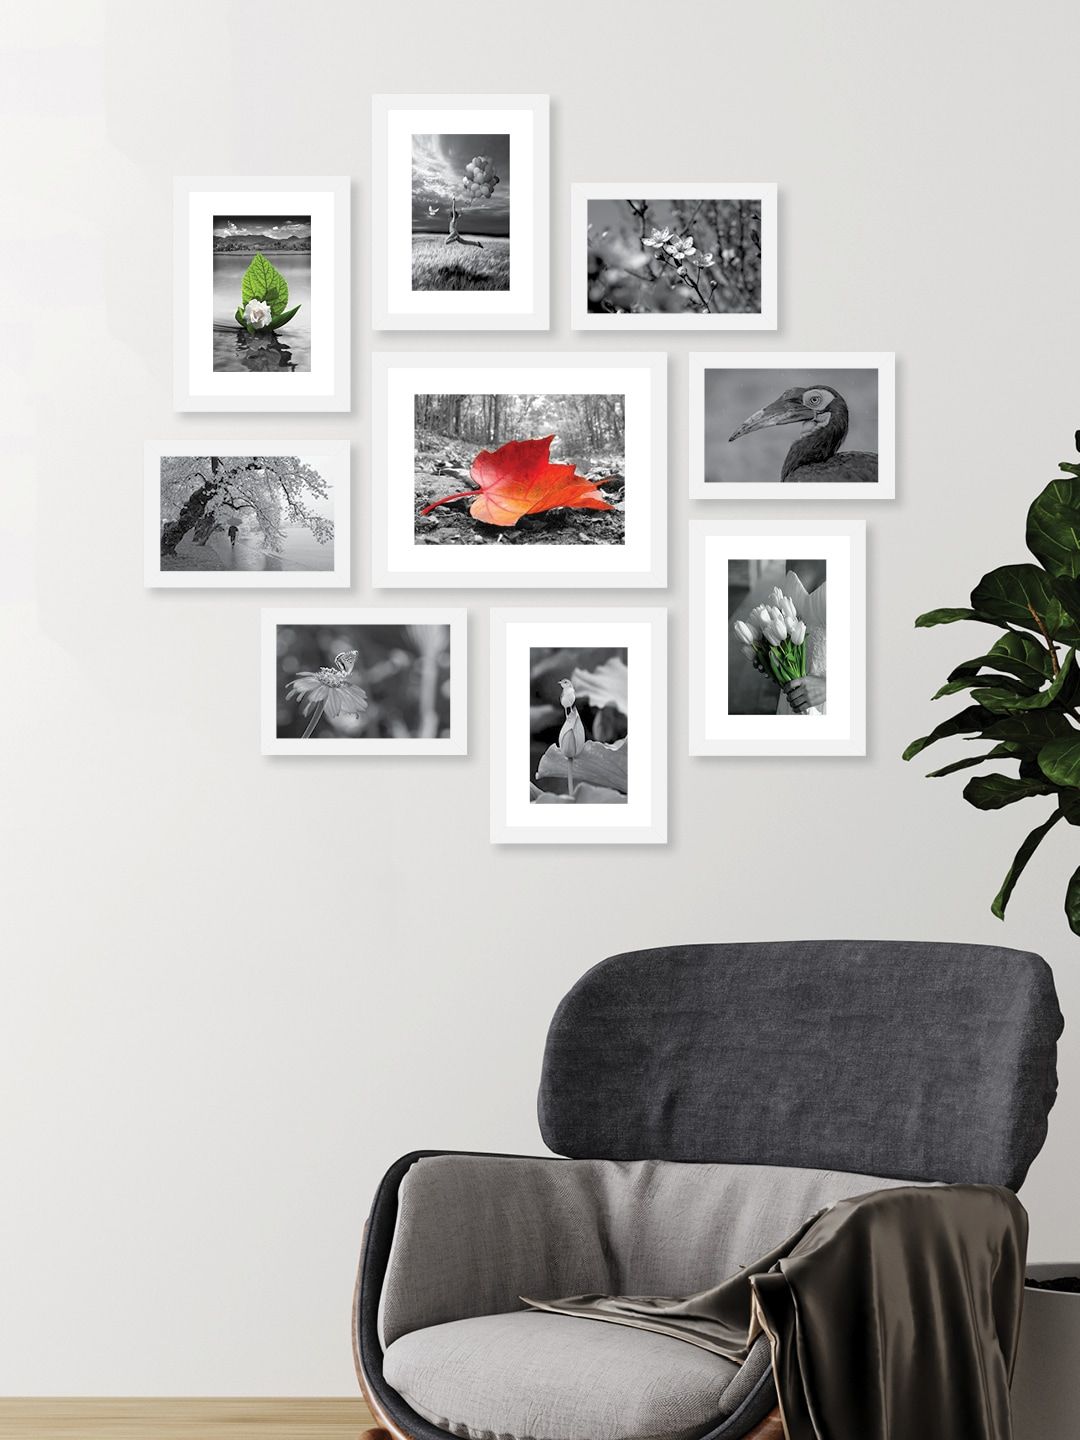 RANDOM Set Of 9 White Solid Collage Photo Frames Price in India